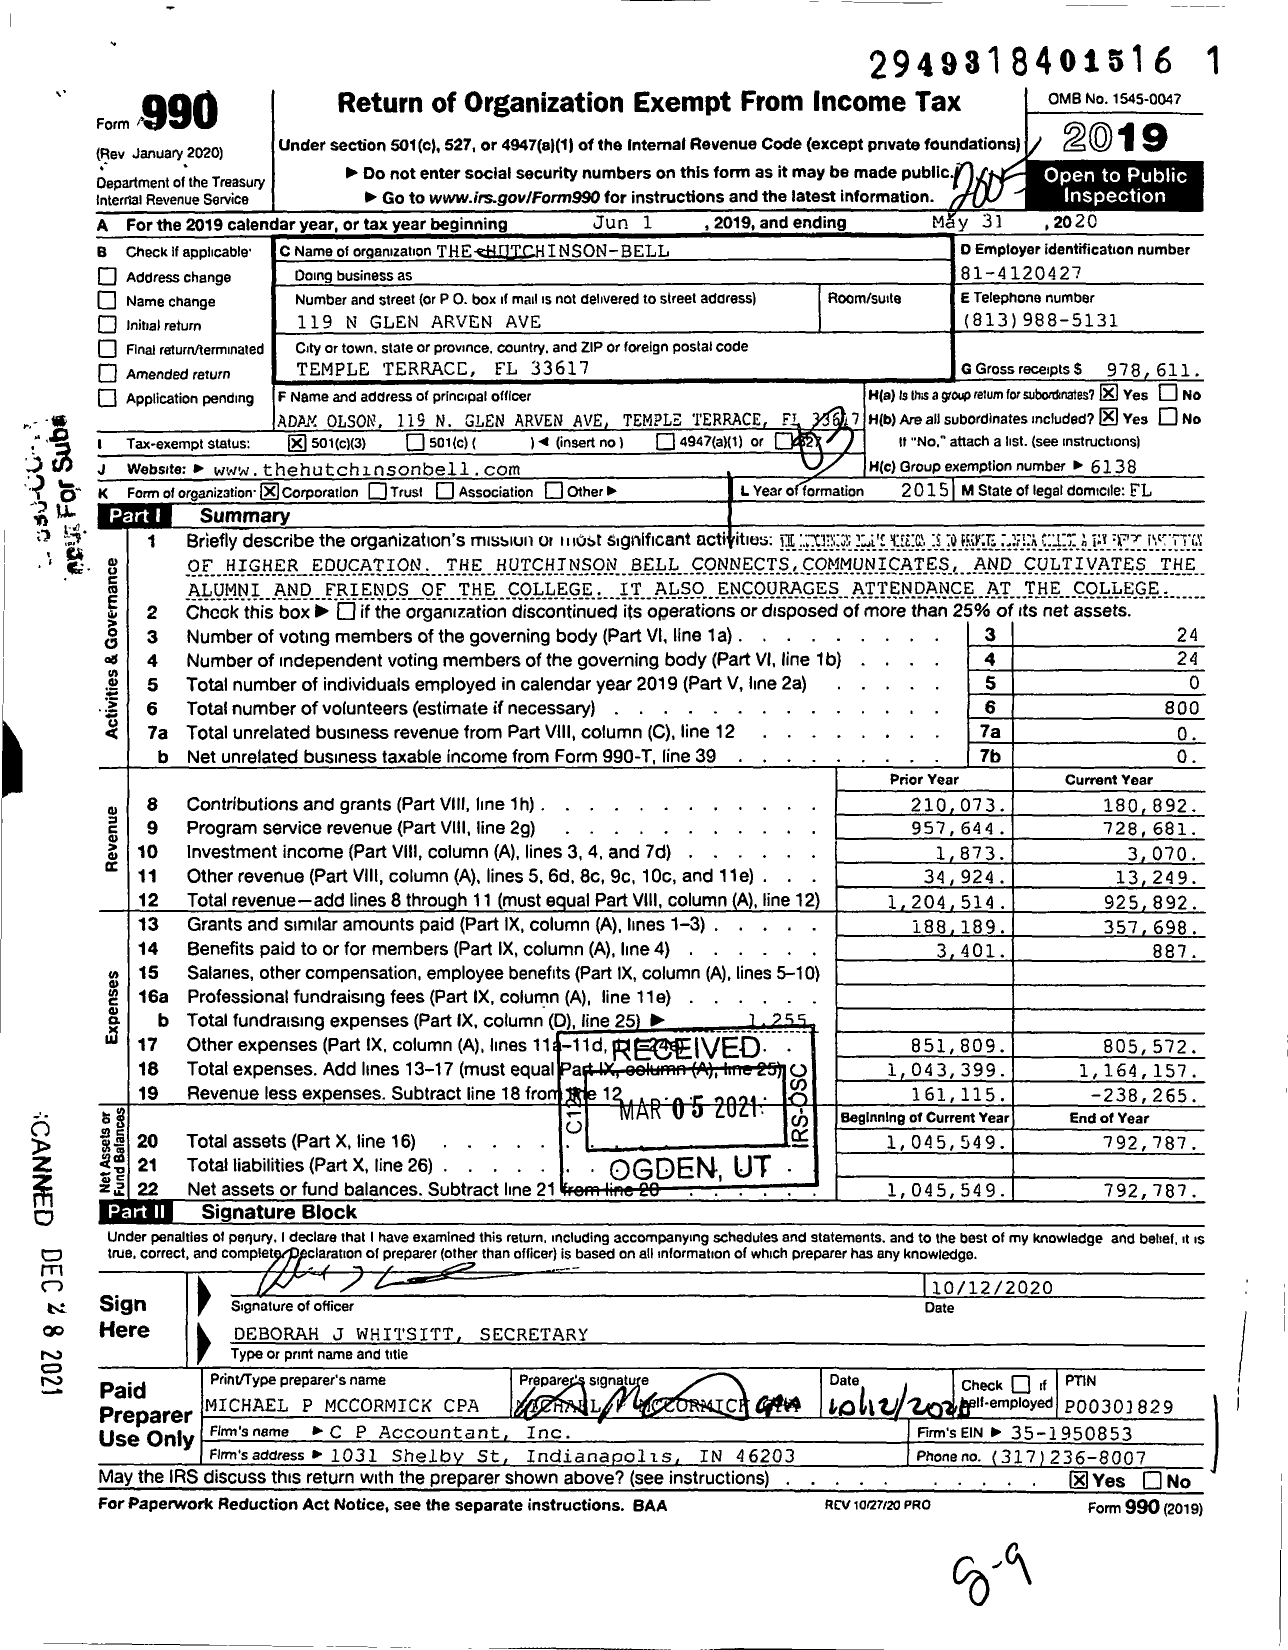 Image of first page of 2019 Form 990 for The-Hutchinson-Bell